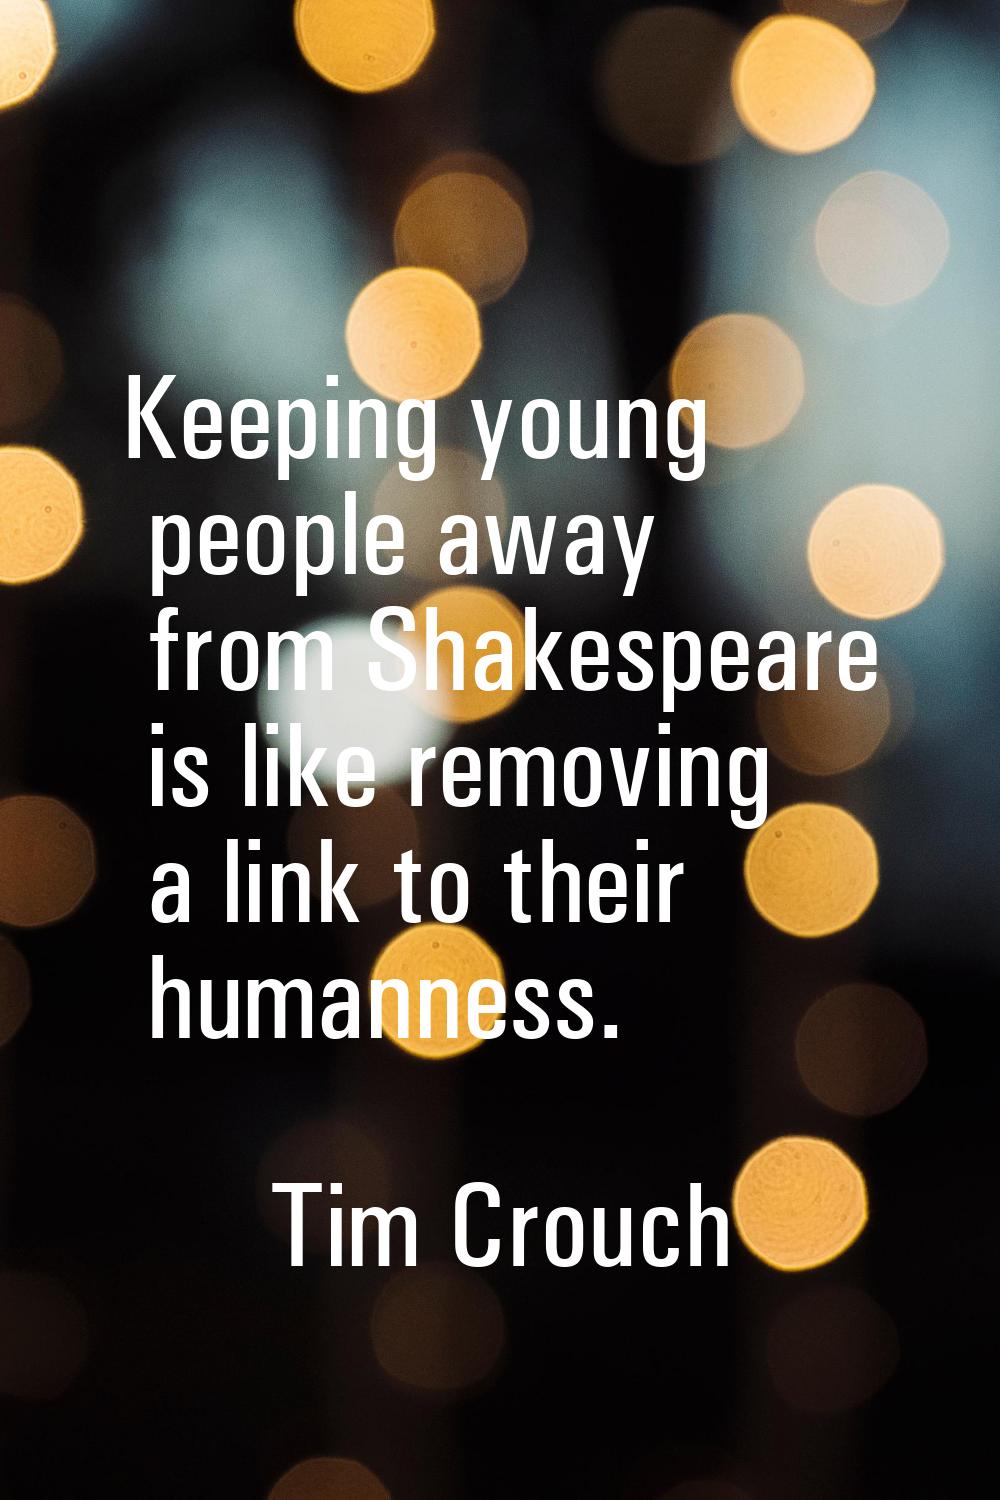 Keeping young people away from Shakespeare is like removing a link to their humanness.